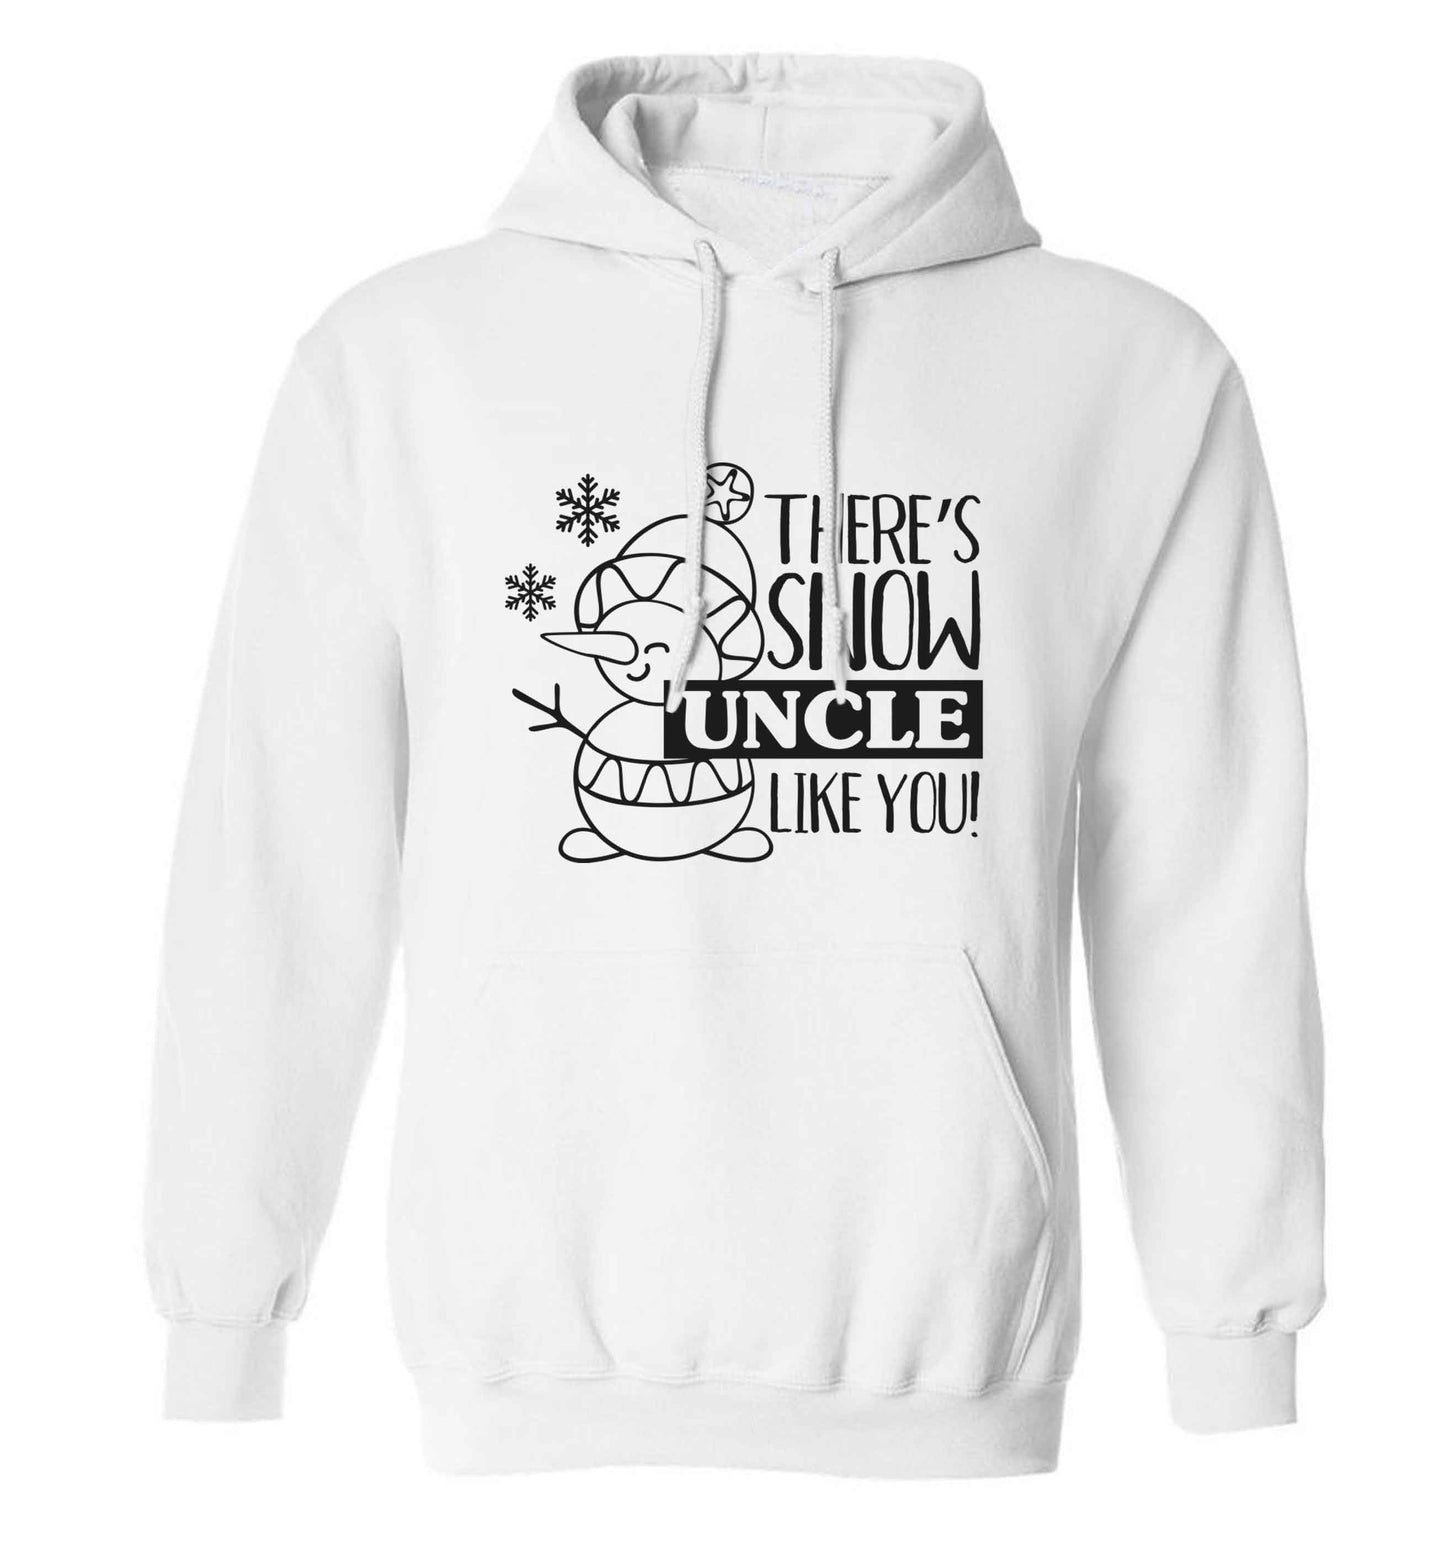 There's snow uncle like you adults unisex white hoodie 2XL